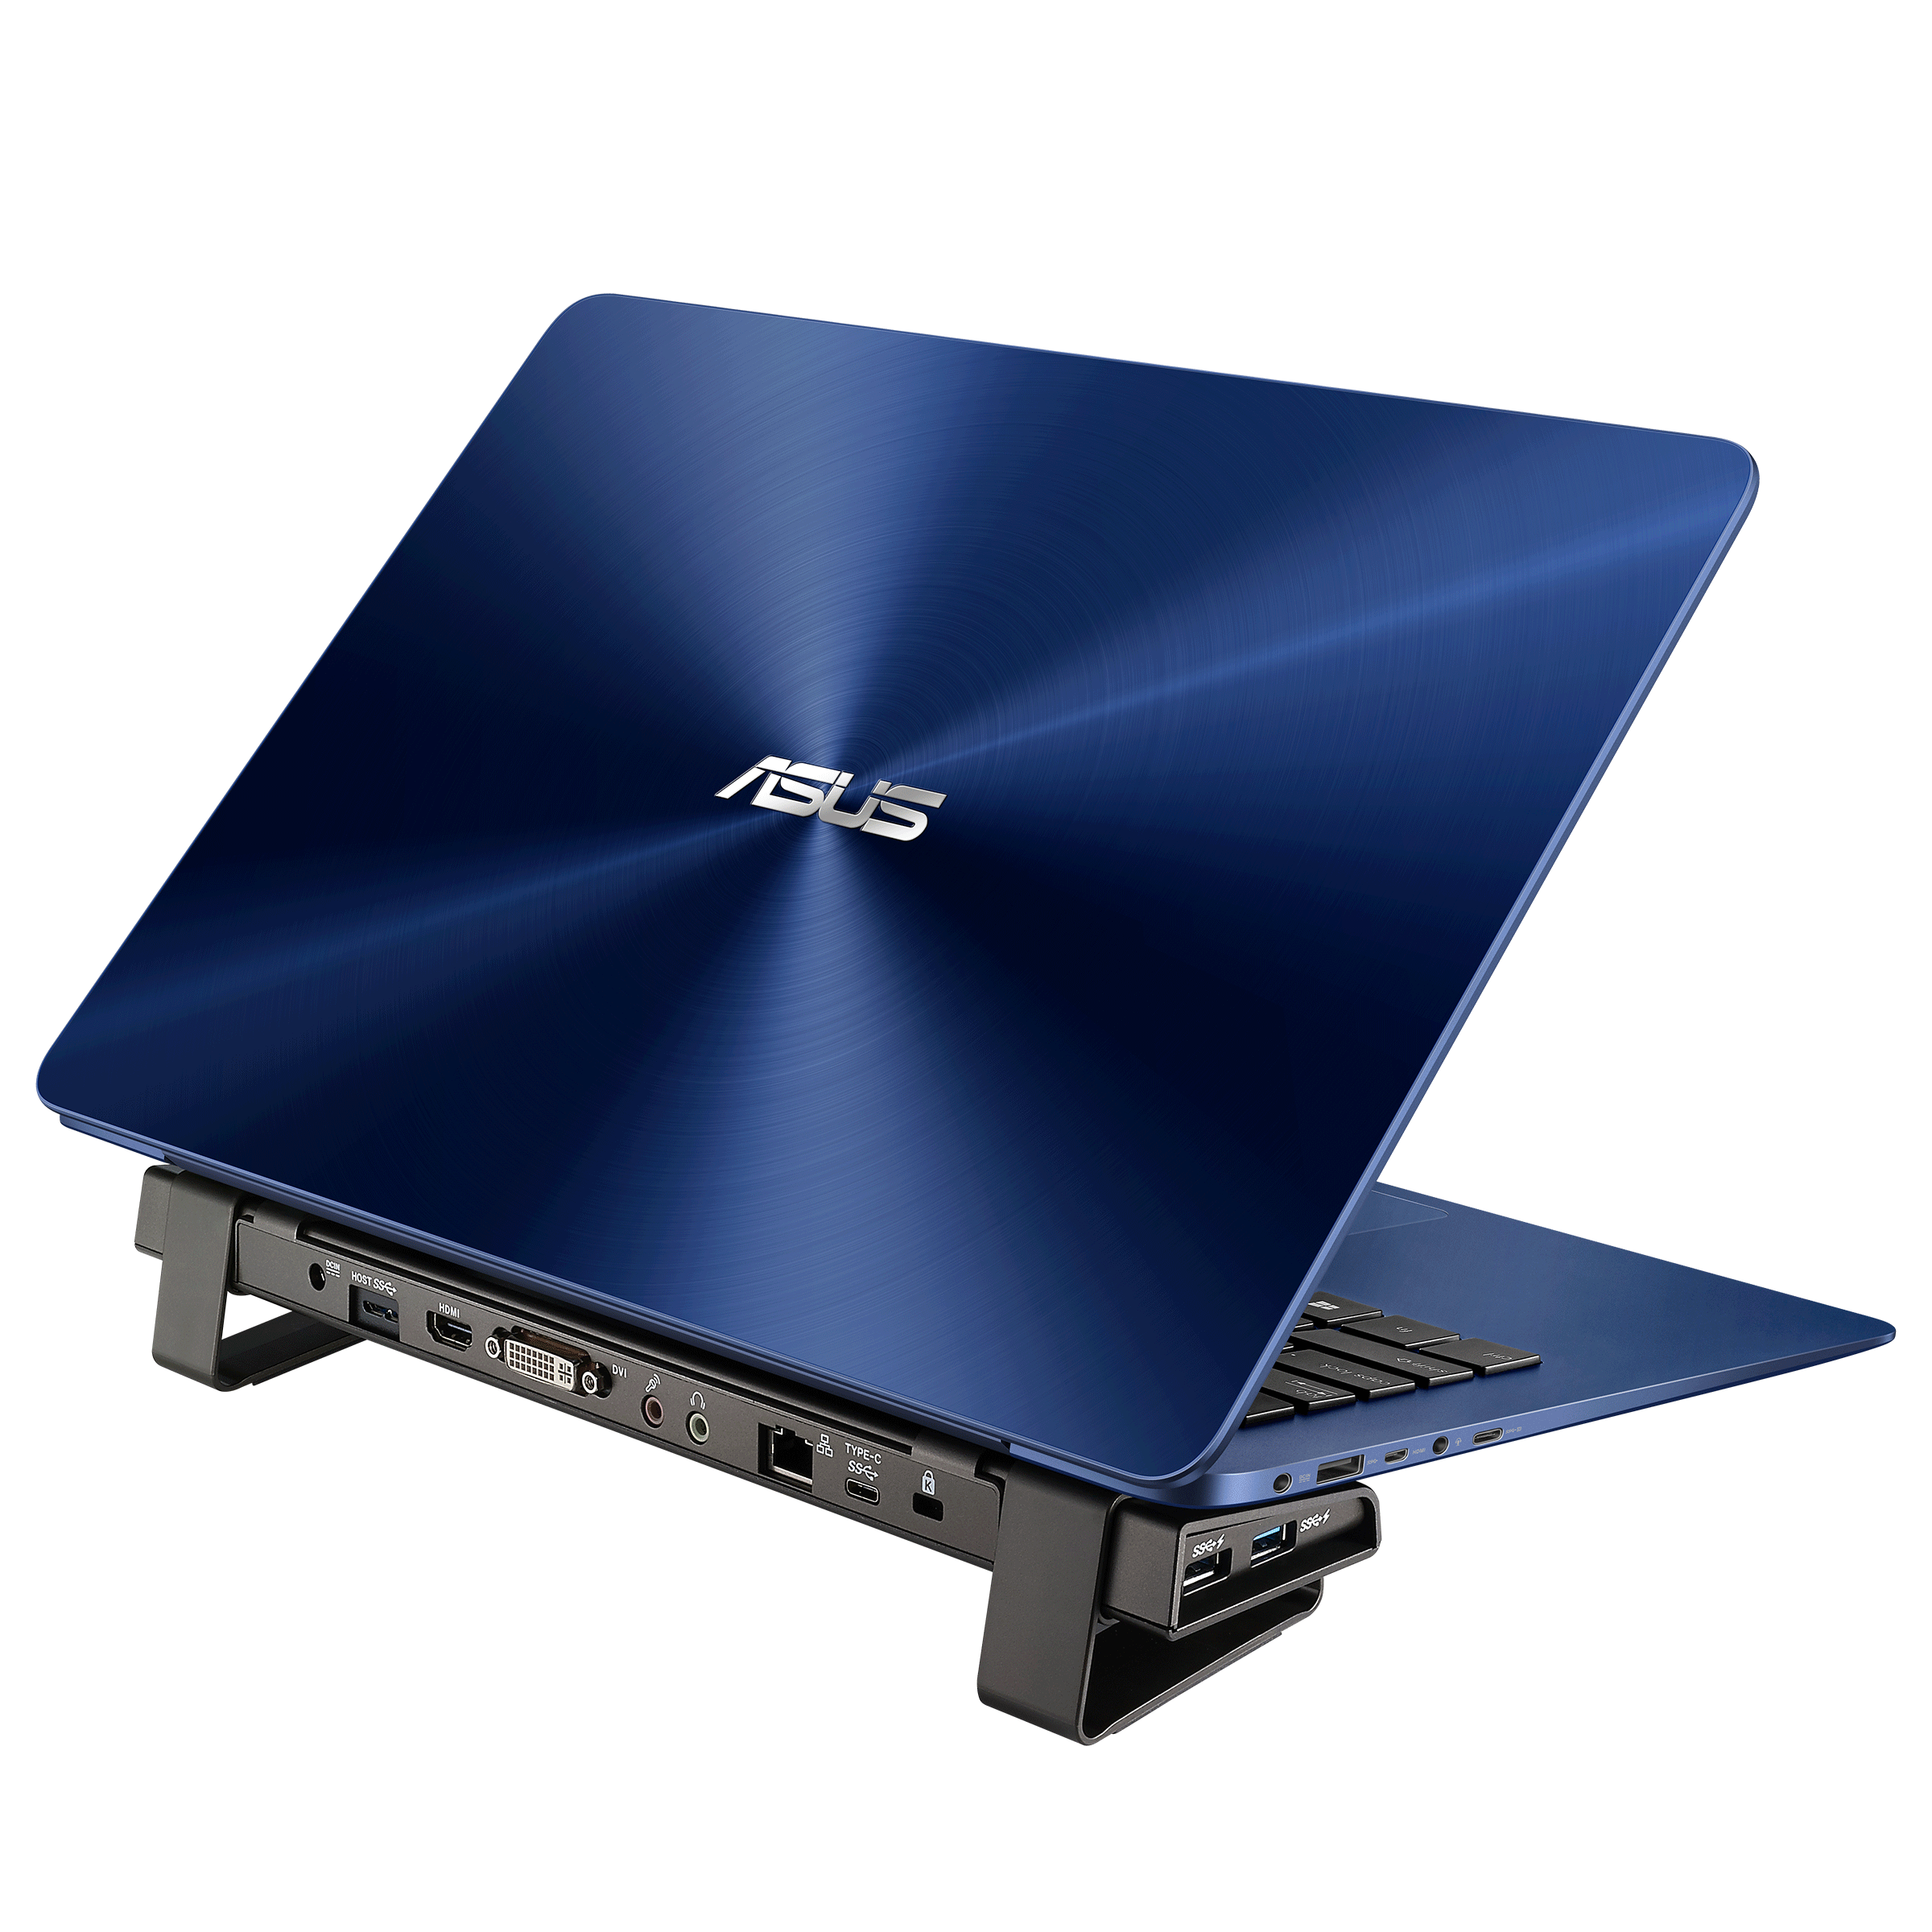 Privilegium ting deformation ASUS USB3.0 HZ-3B Docking Station｜Docks Dongles and Cable｜ASUS Global